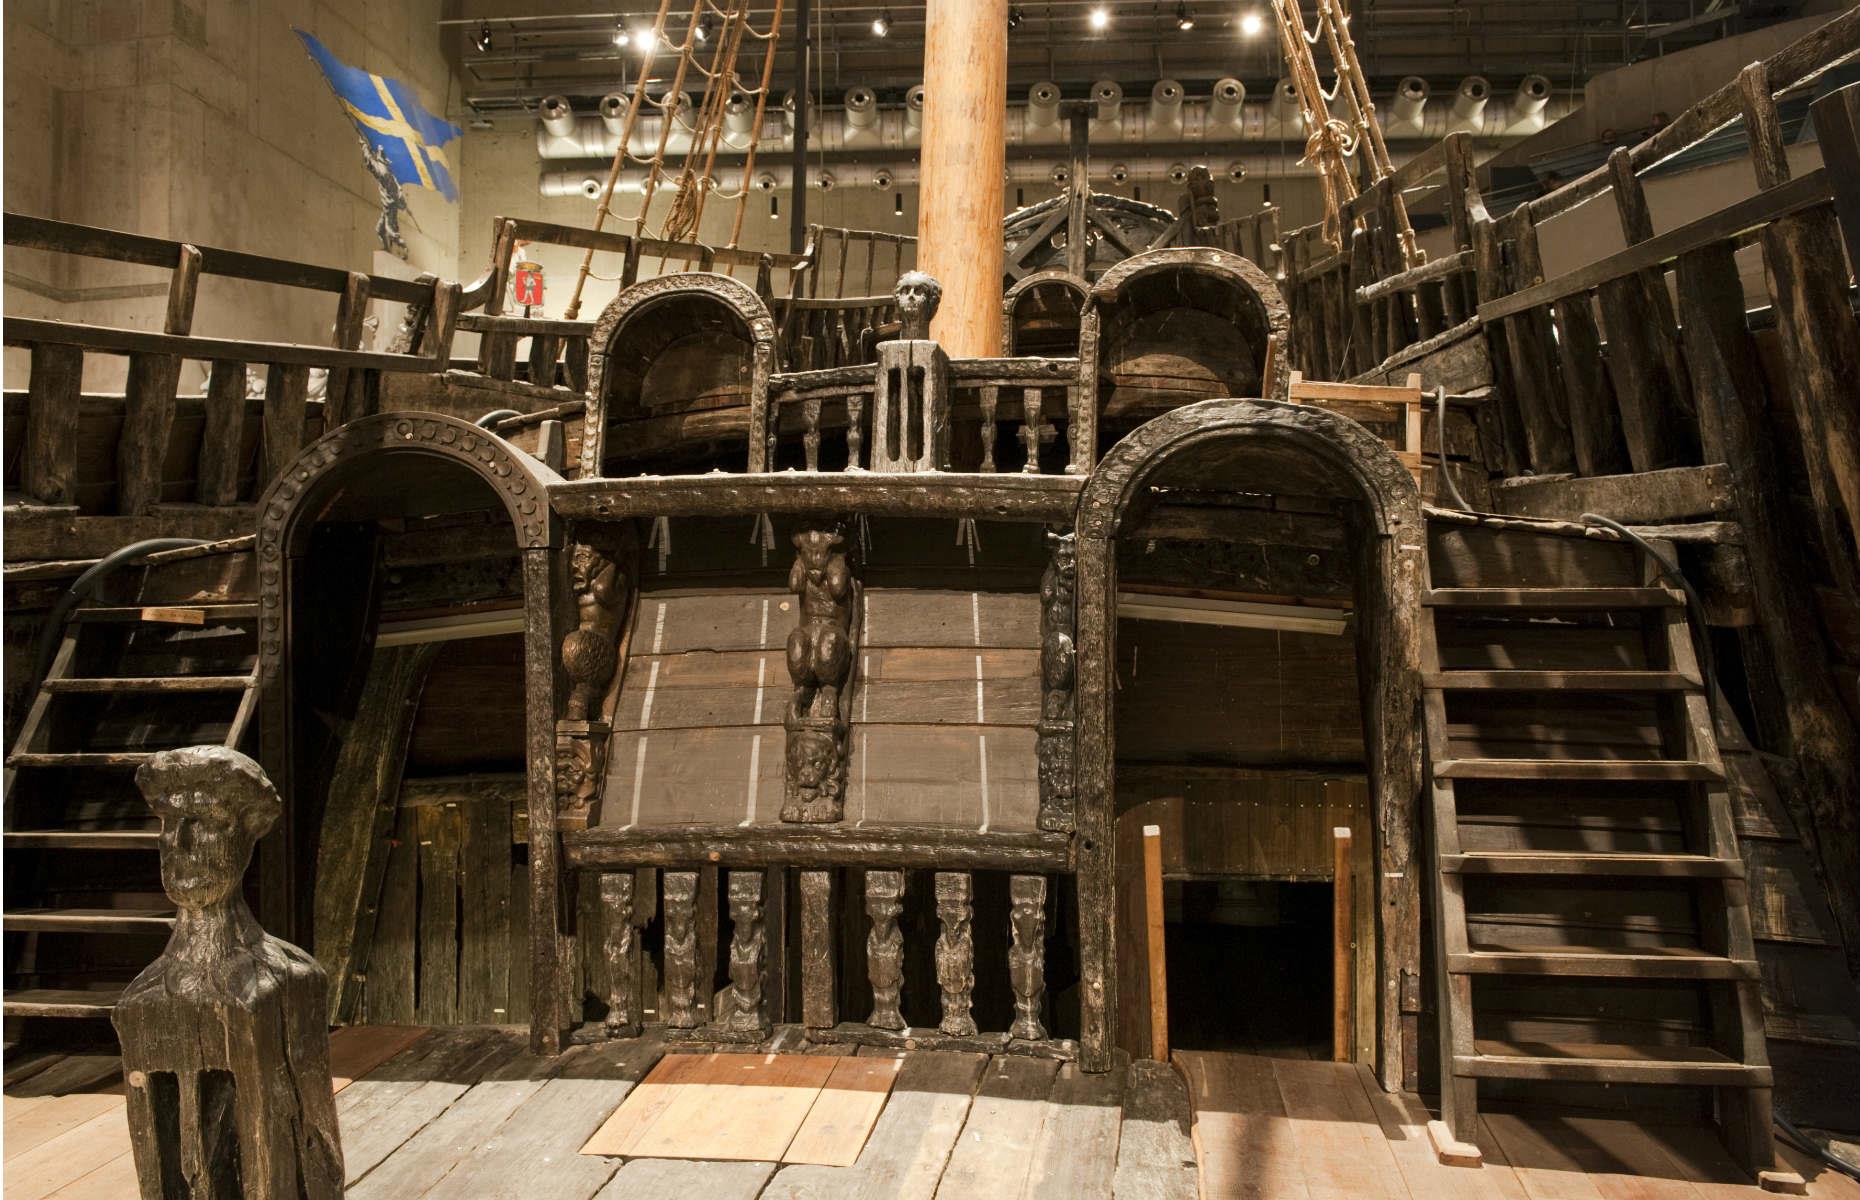 <p><a href="https://www.vasamuseet.se/en">The Vasa Museum</a> is in the Royal National City Park on Djurgården island in Stockholm, and since she was salvaged in 1961 the ship has been visited by more than 35 million people. Now, the specially-built masts on the museum’s roof have become part of Stockholm’s skyline, representing the height of the originals. </p>